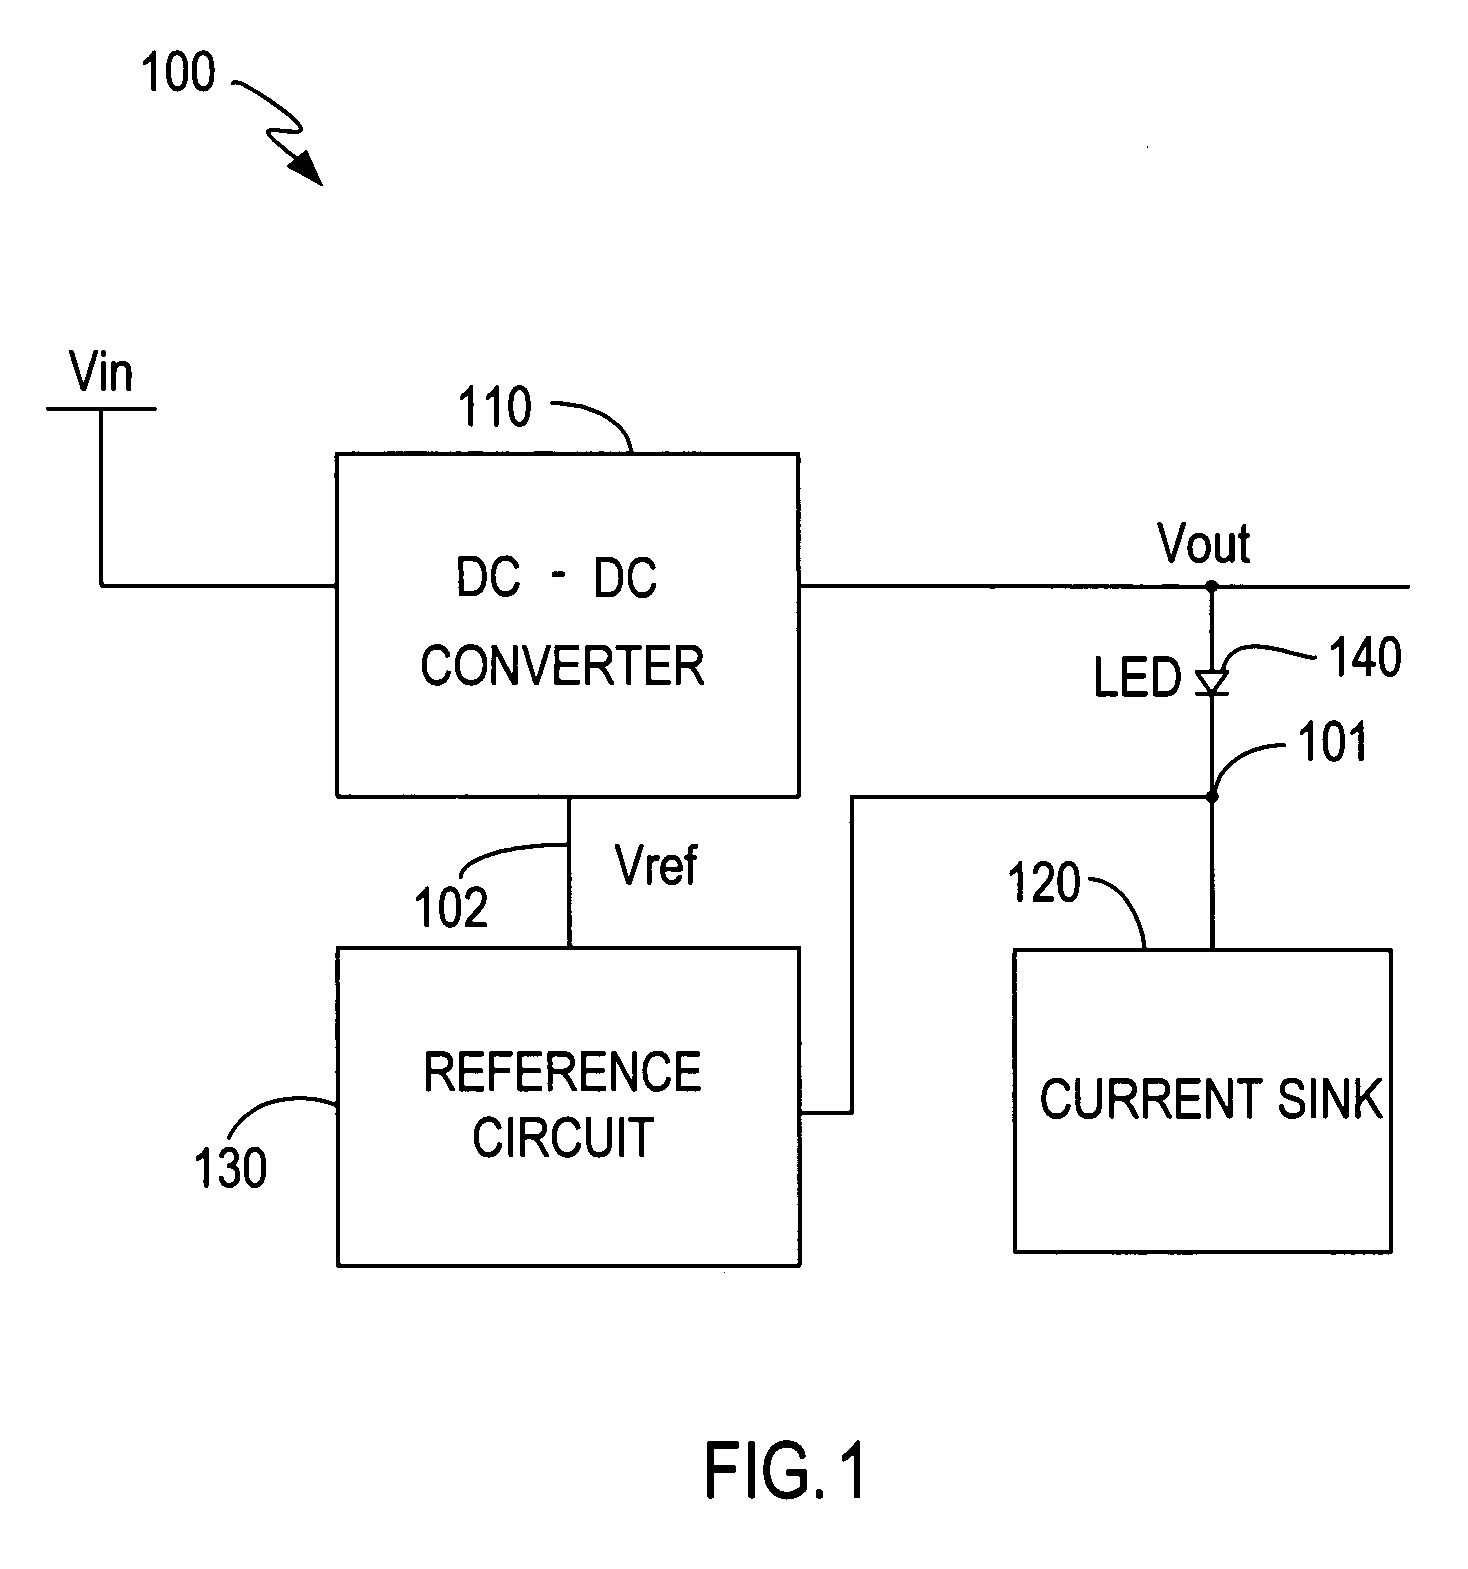 Apparatus and method for regulating white LEDs